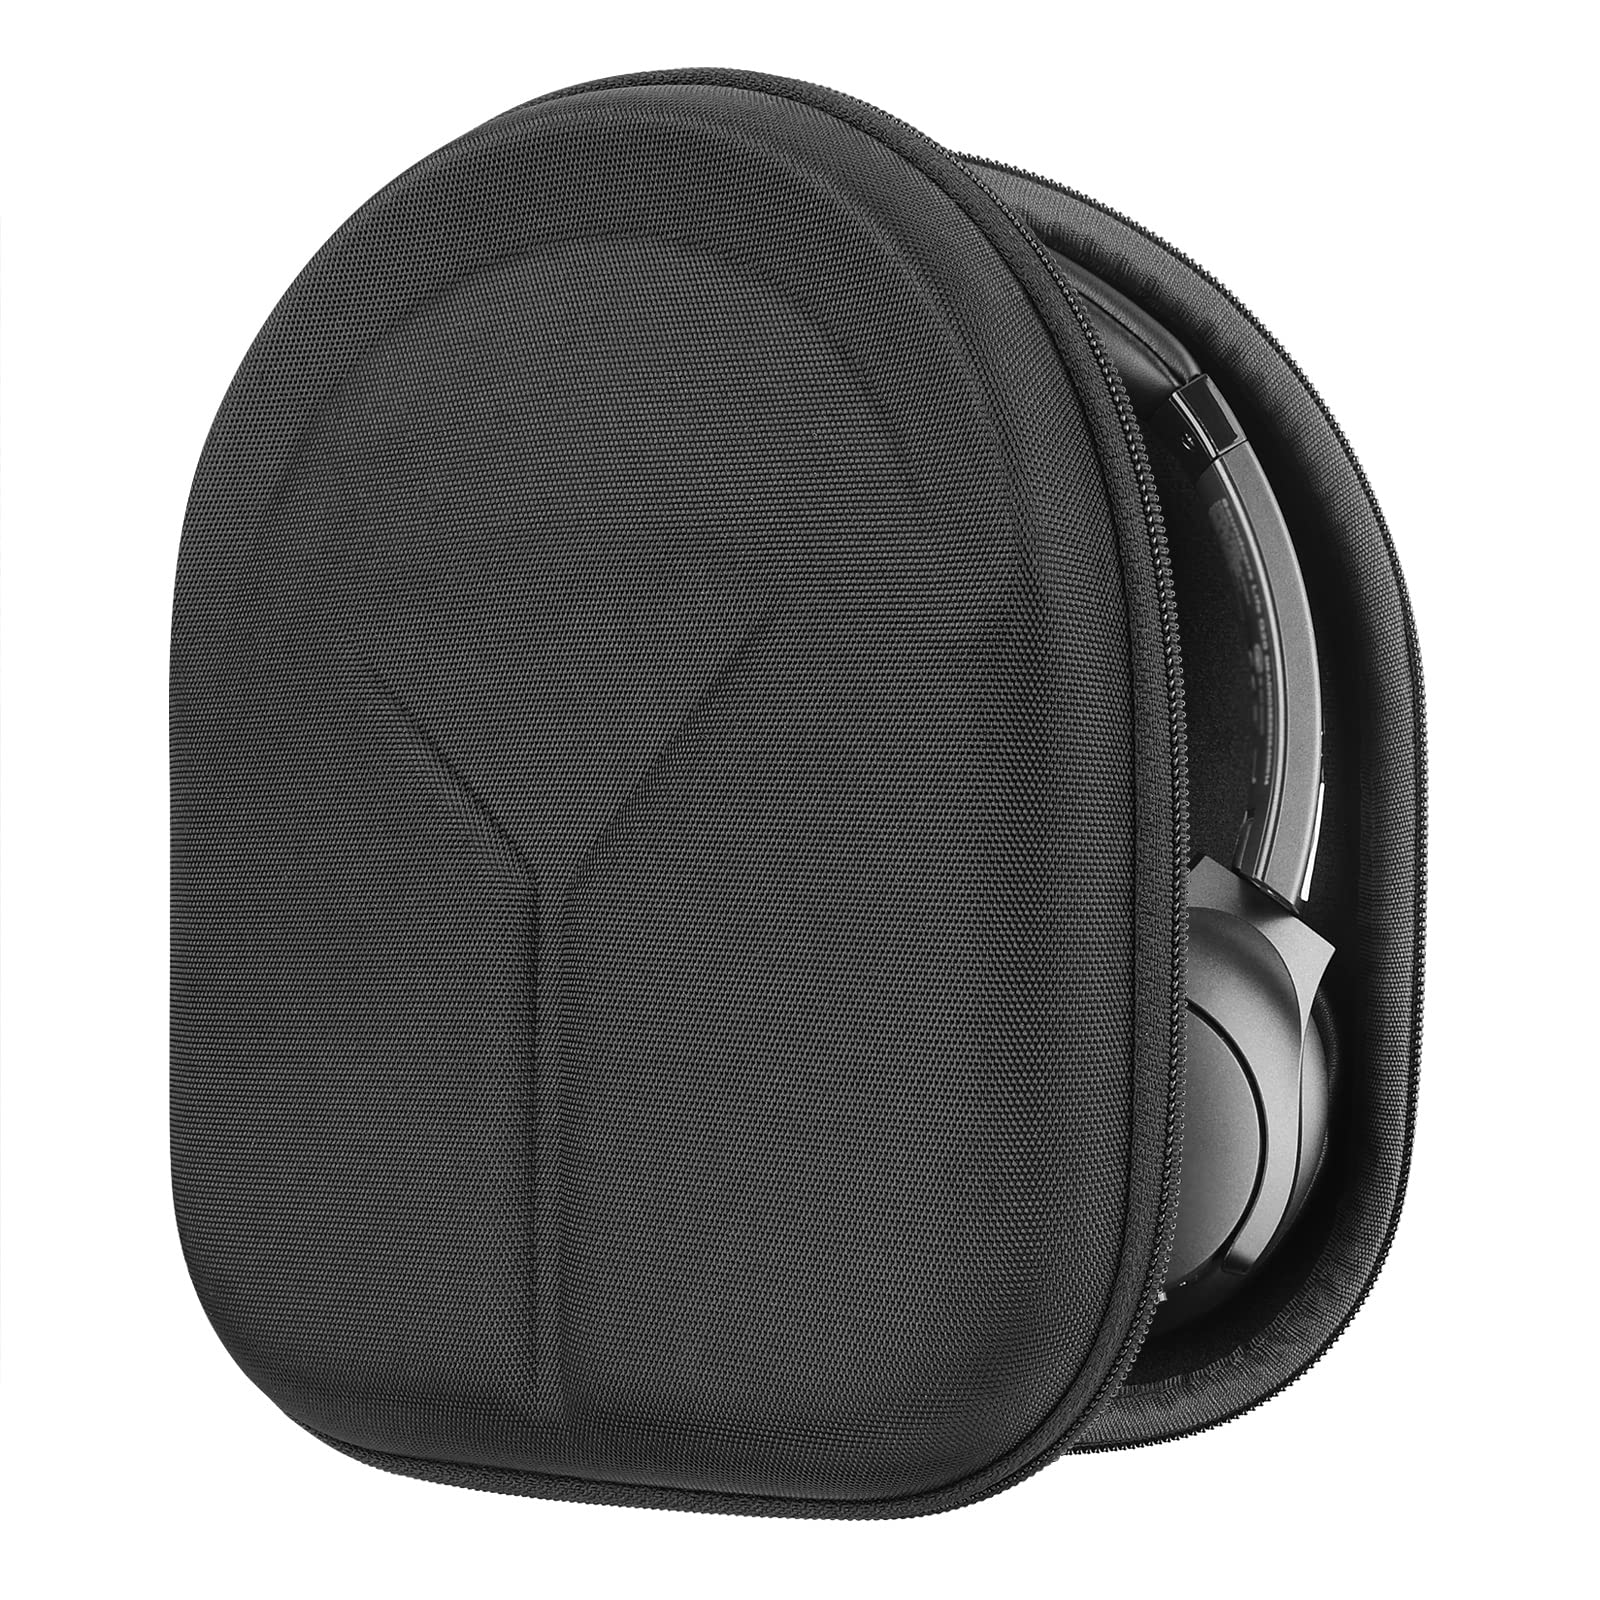 Geekria Shield Case Headphones Compatible with Anker Soundcore Space Q45, Life Q35, Life Q30, Life Q20i, Life Q20+, Replacement Protective Hard Shell Travel Carrying Bag with Cable Storage (Black)